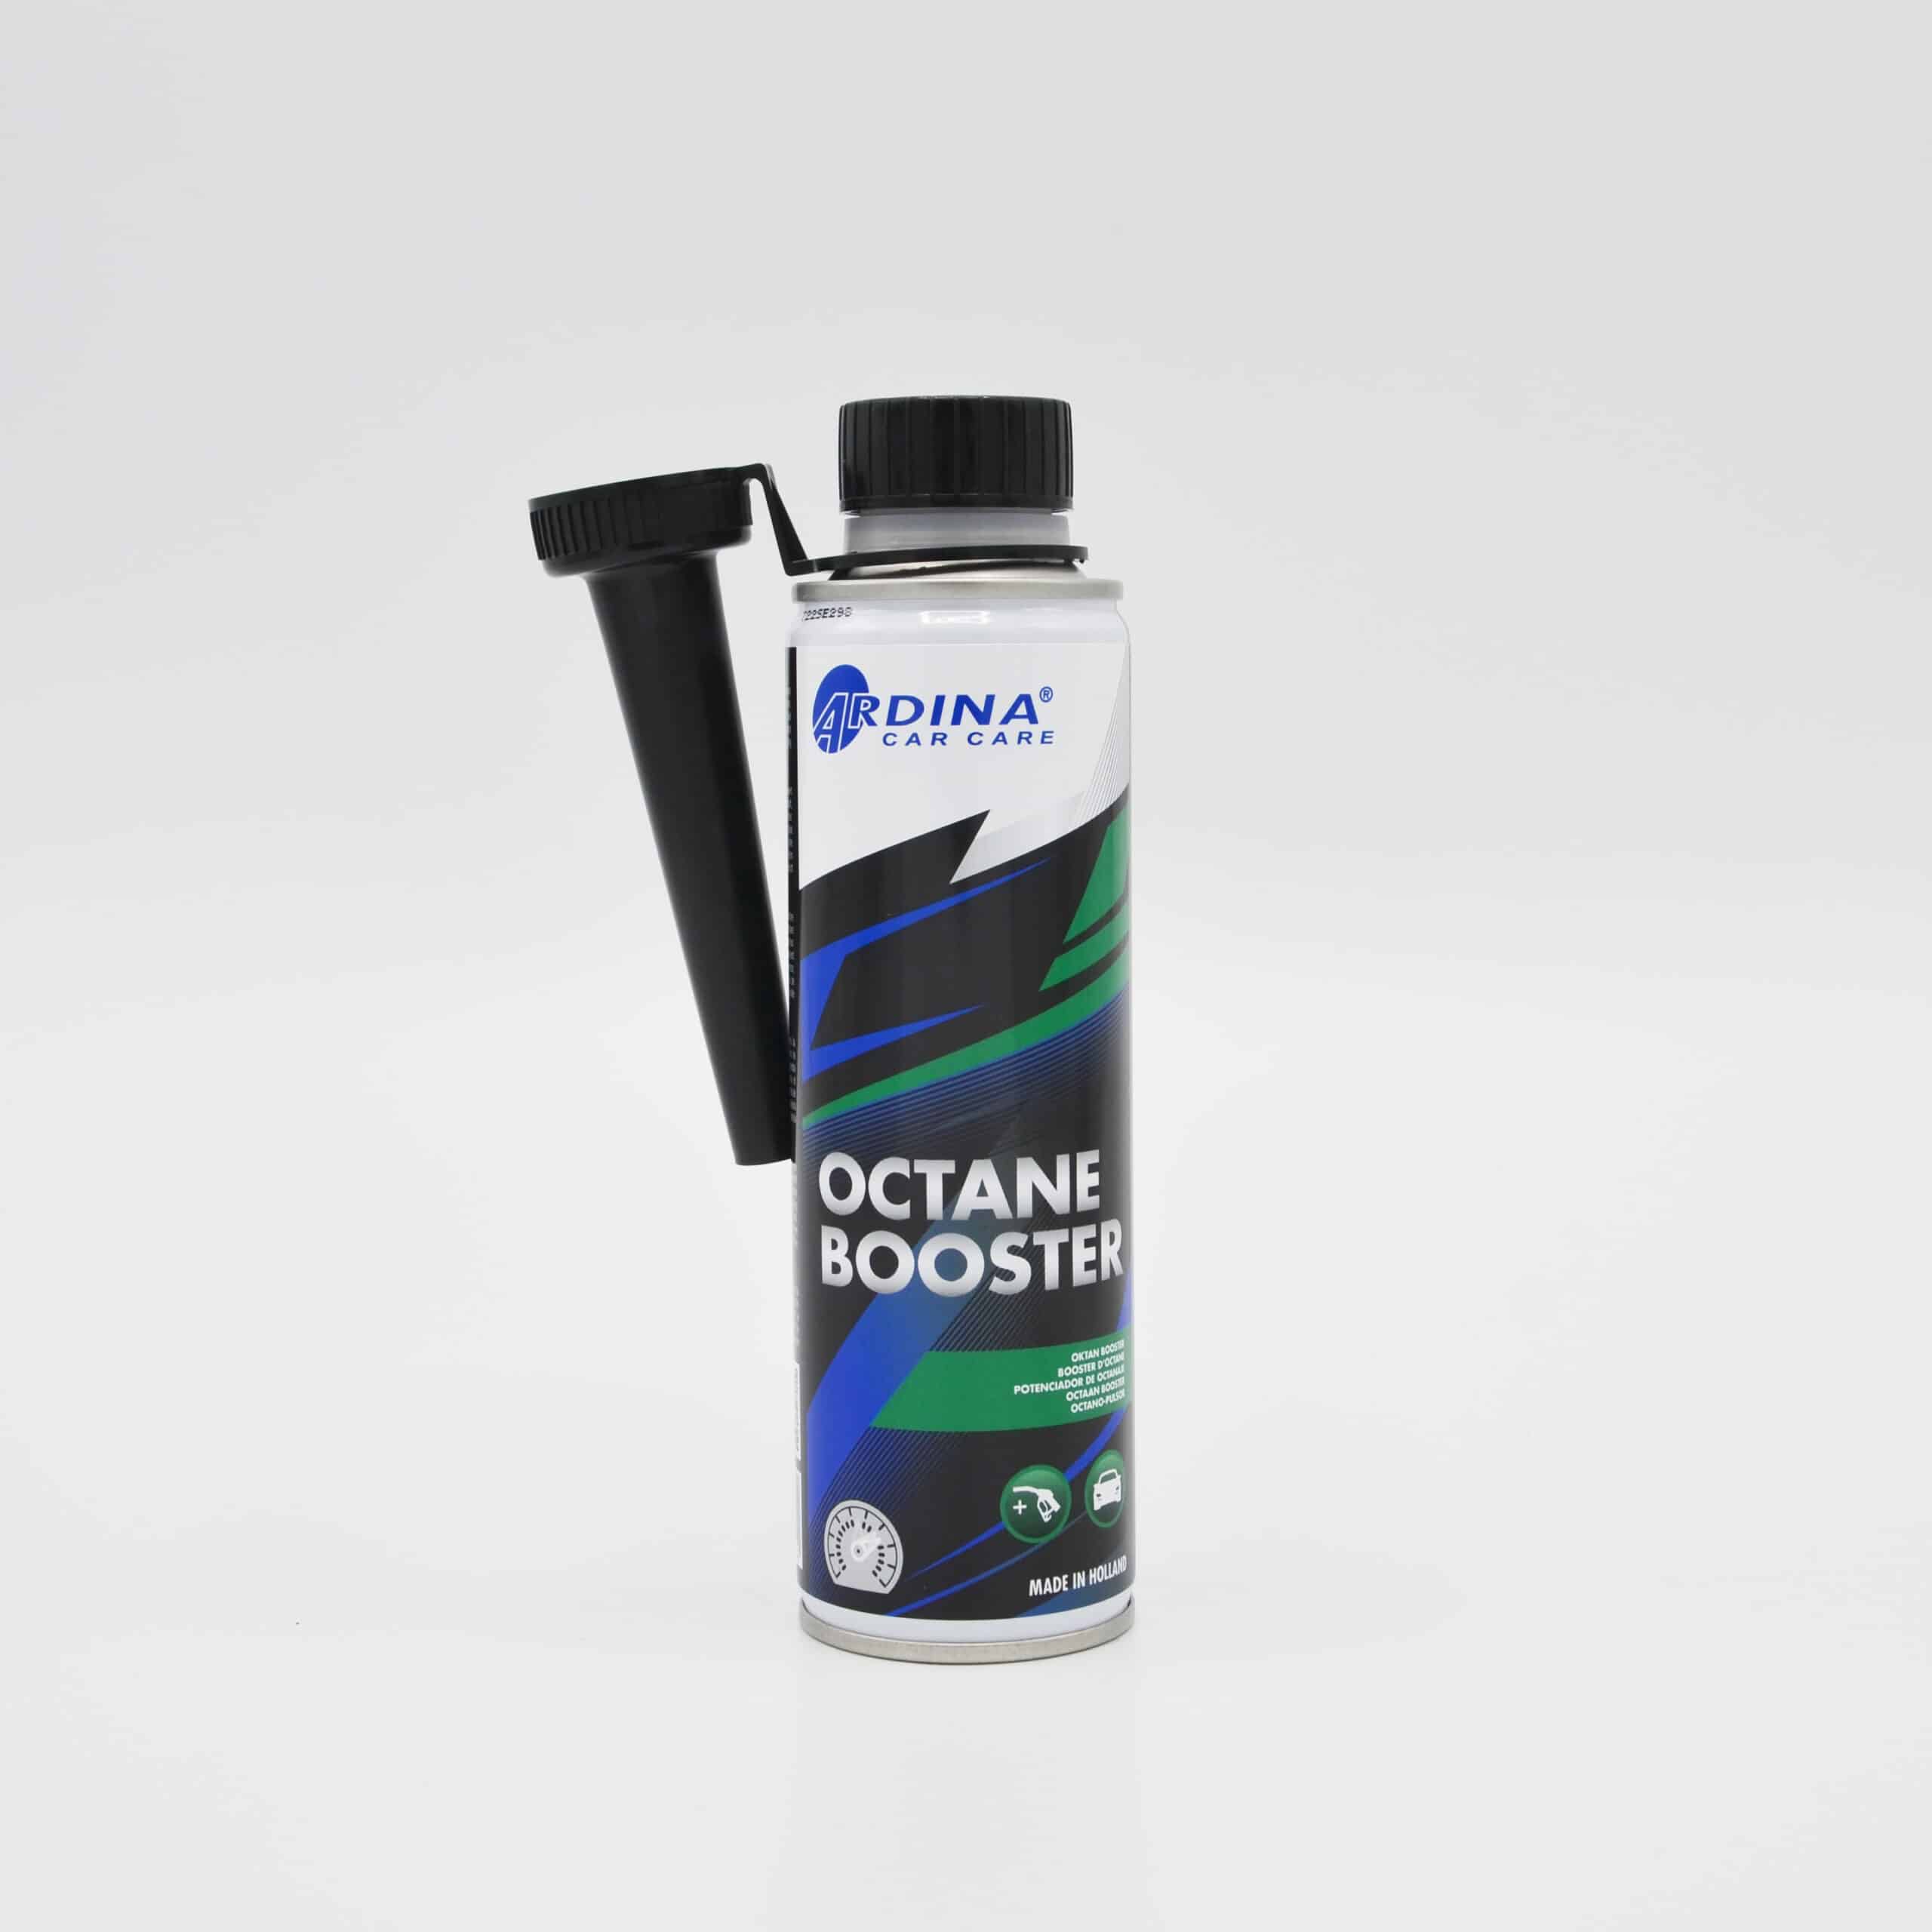 Ardina Octane Booster increases the octane number and cleans the fuel intake system.